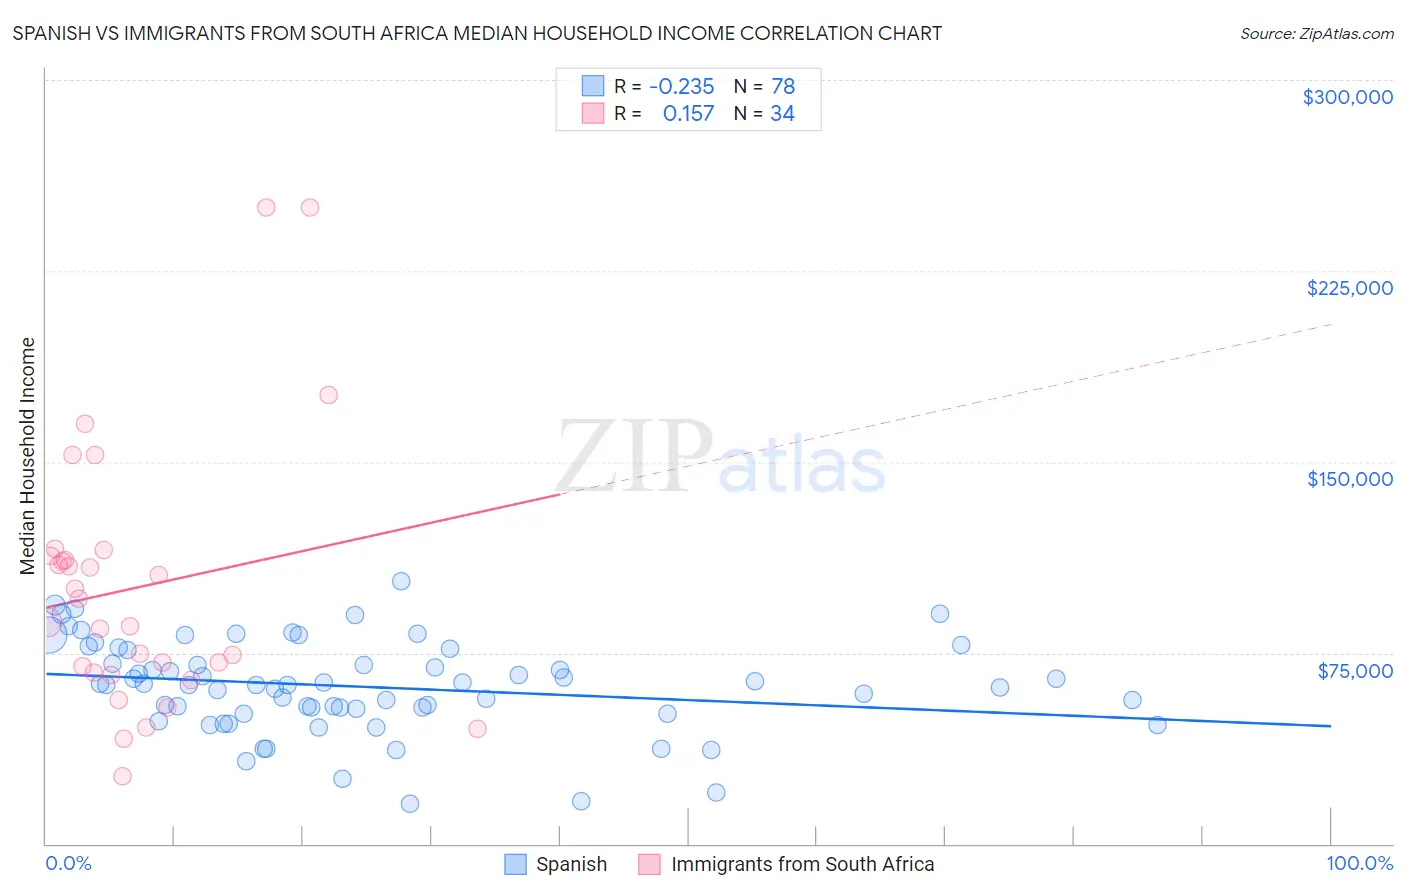 Spanish vs Immigrants from South Africa Median Household Income